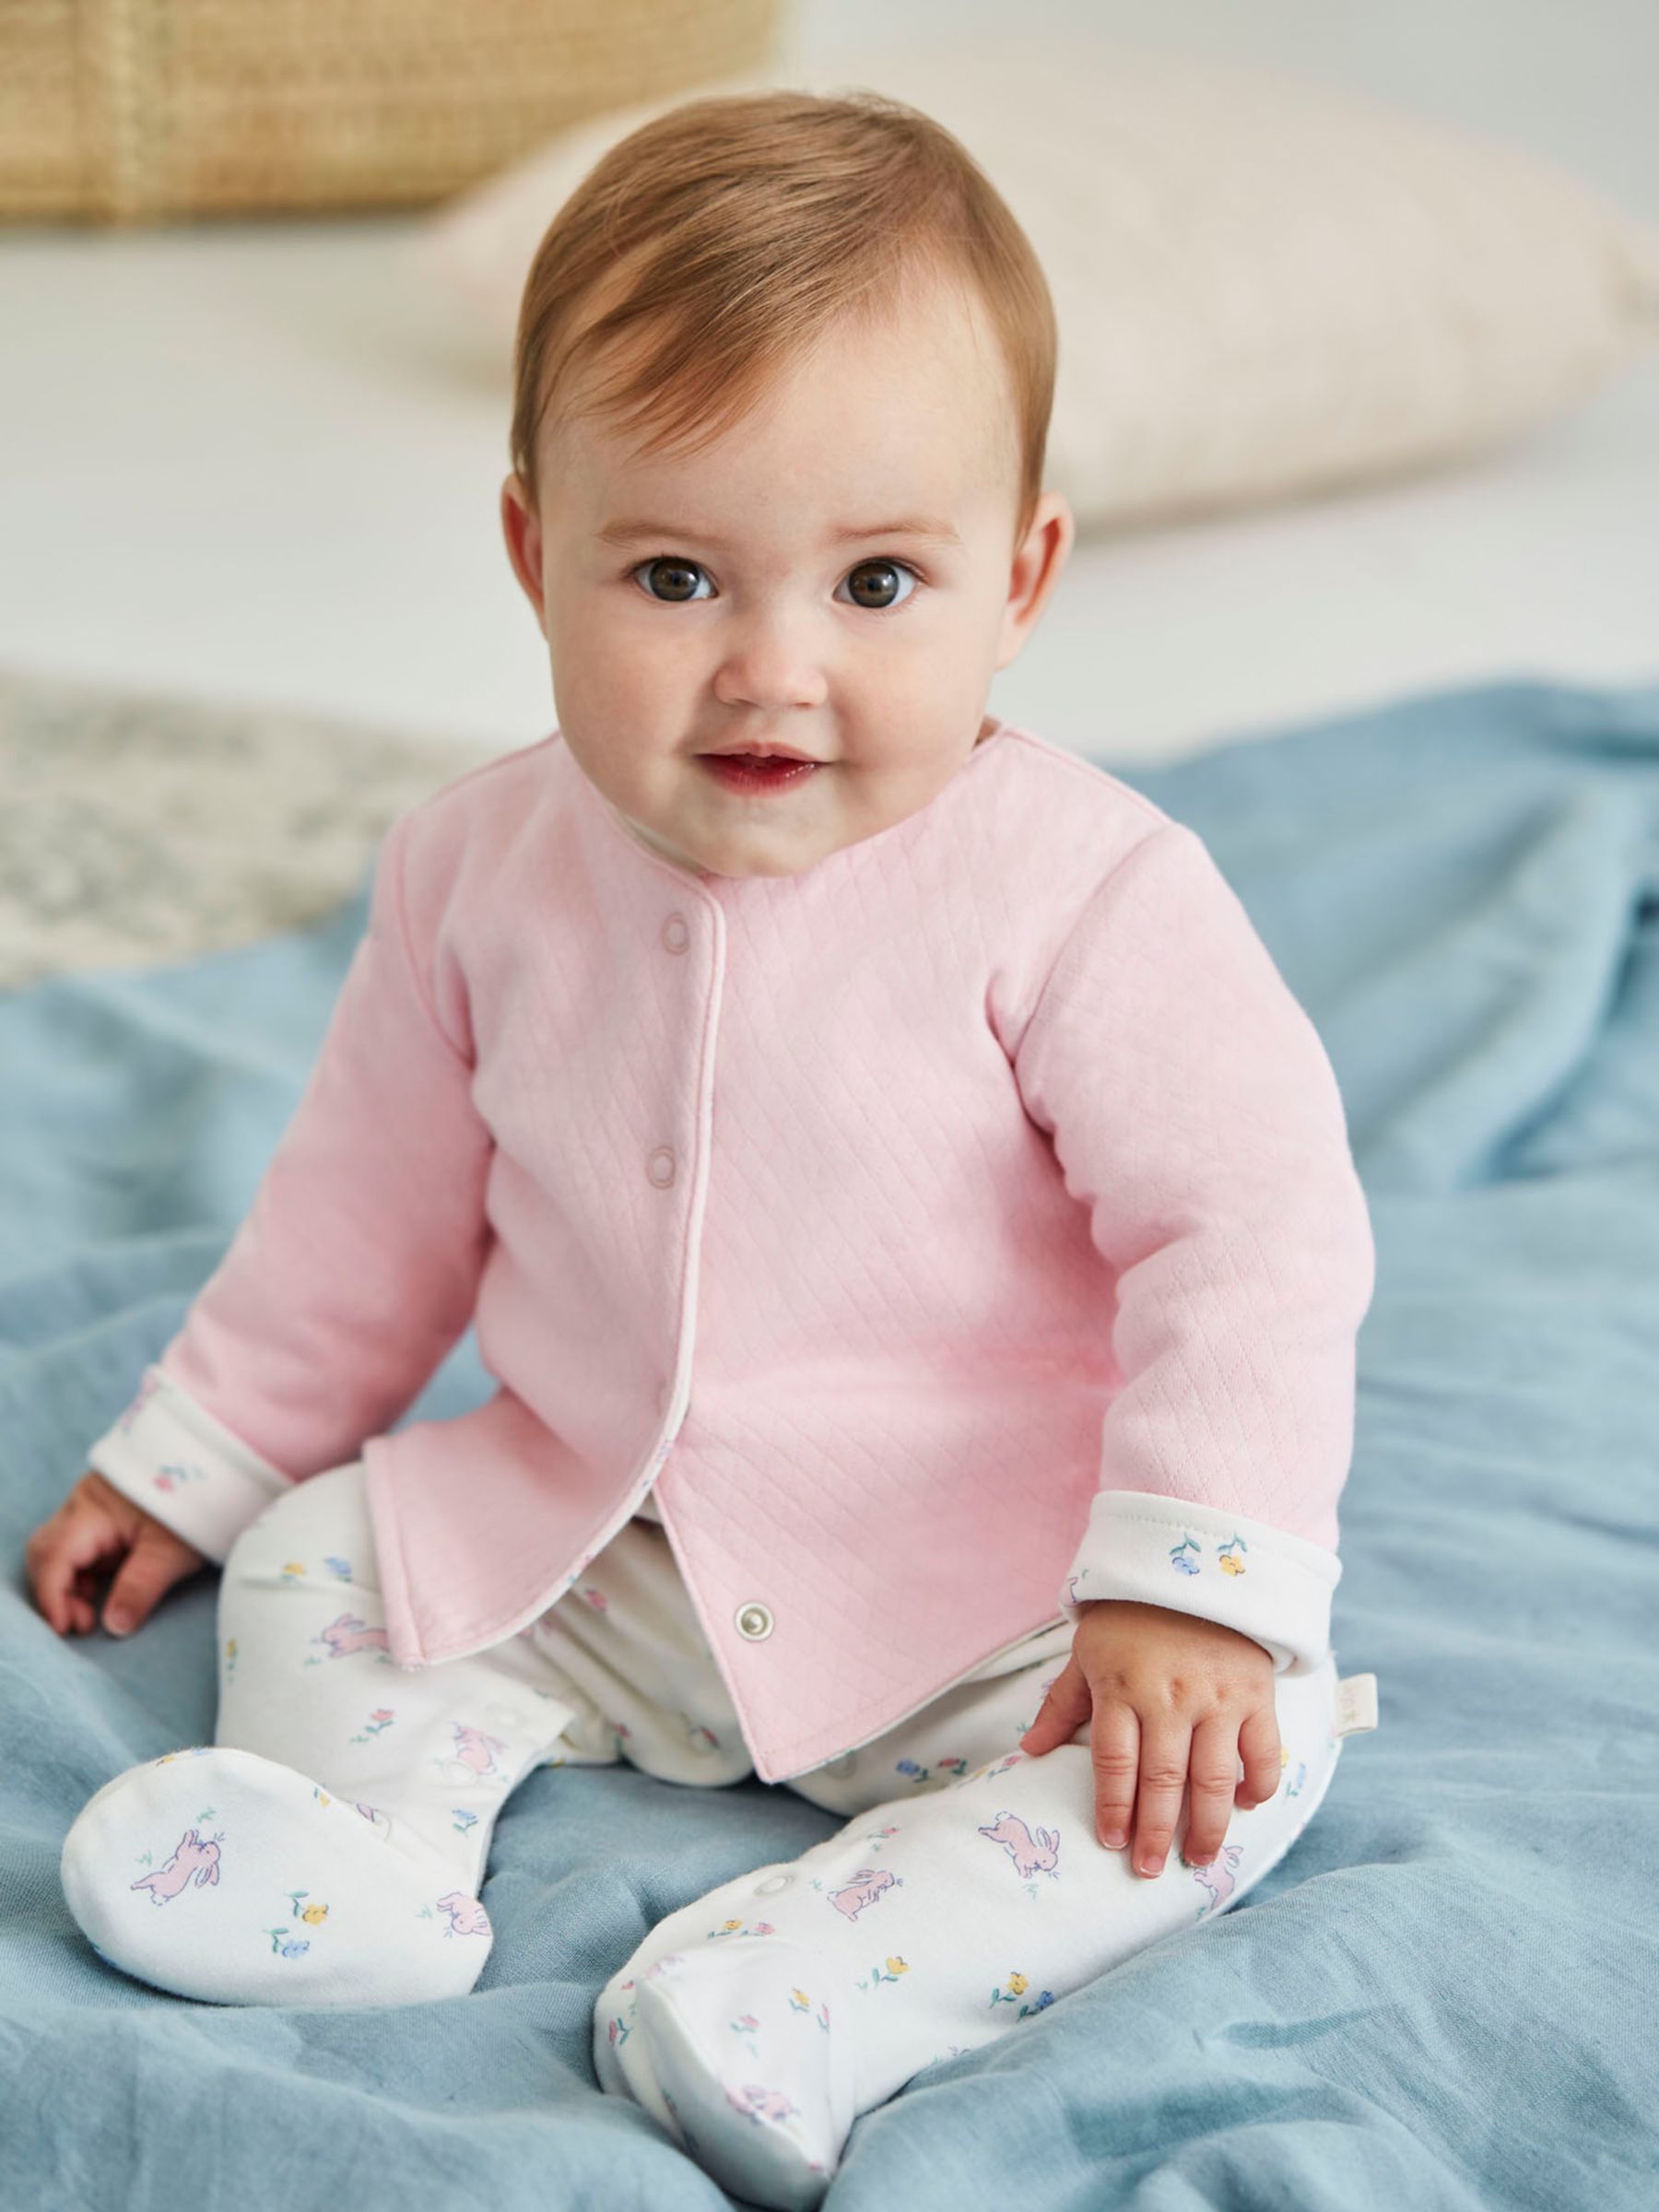 Jojo Maman Bebe, Explore the beautiful new Peter Rabbit collection from JoJo  Maman Bébé! Find the full range on their website 